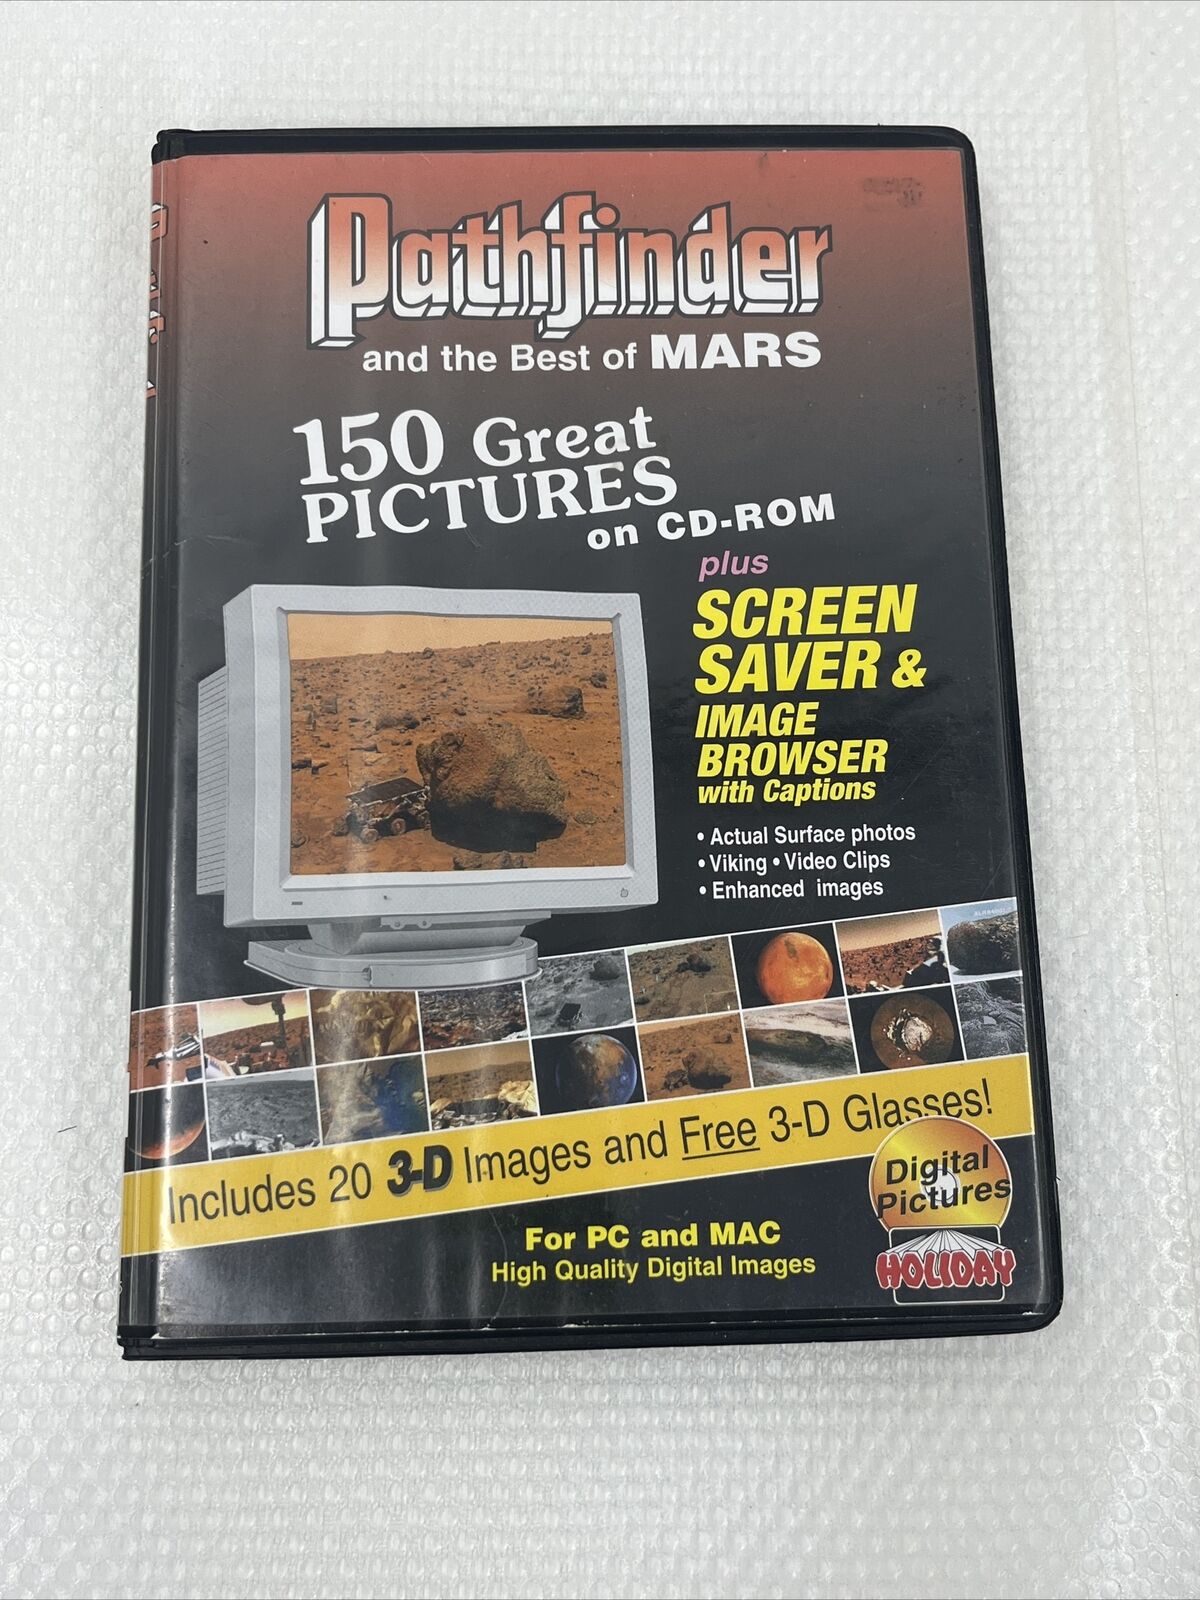 Pathfinder And The Best Of Mars 150 Great Pictures On Cd-Rom (CD-ROM, 1997)